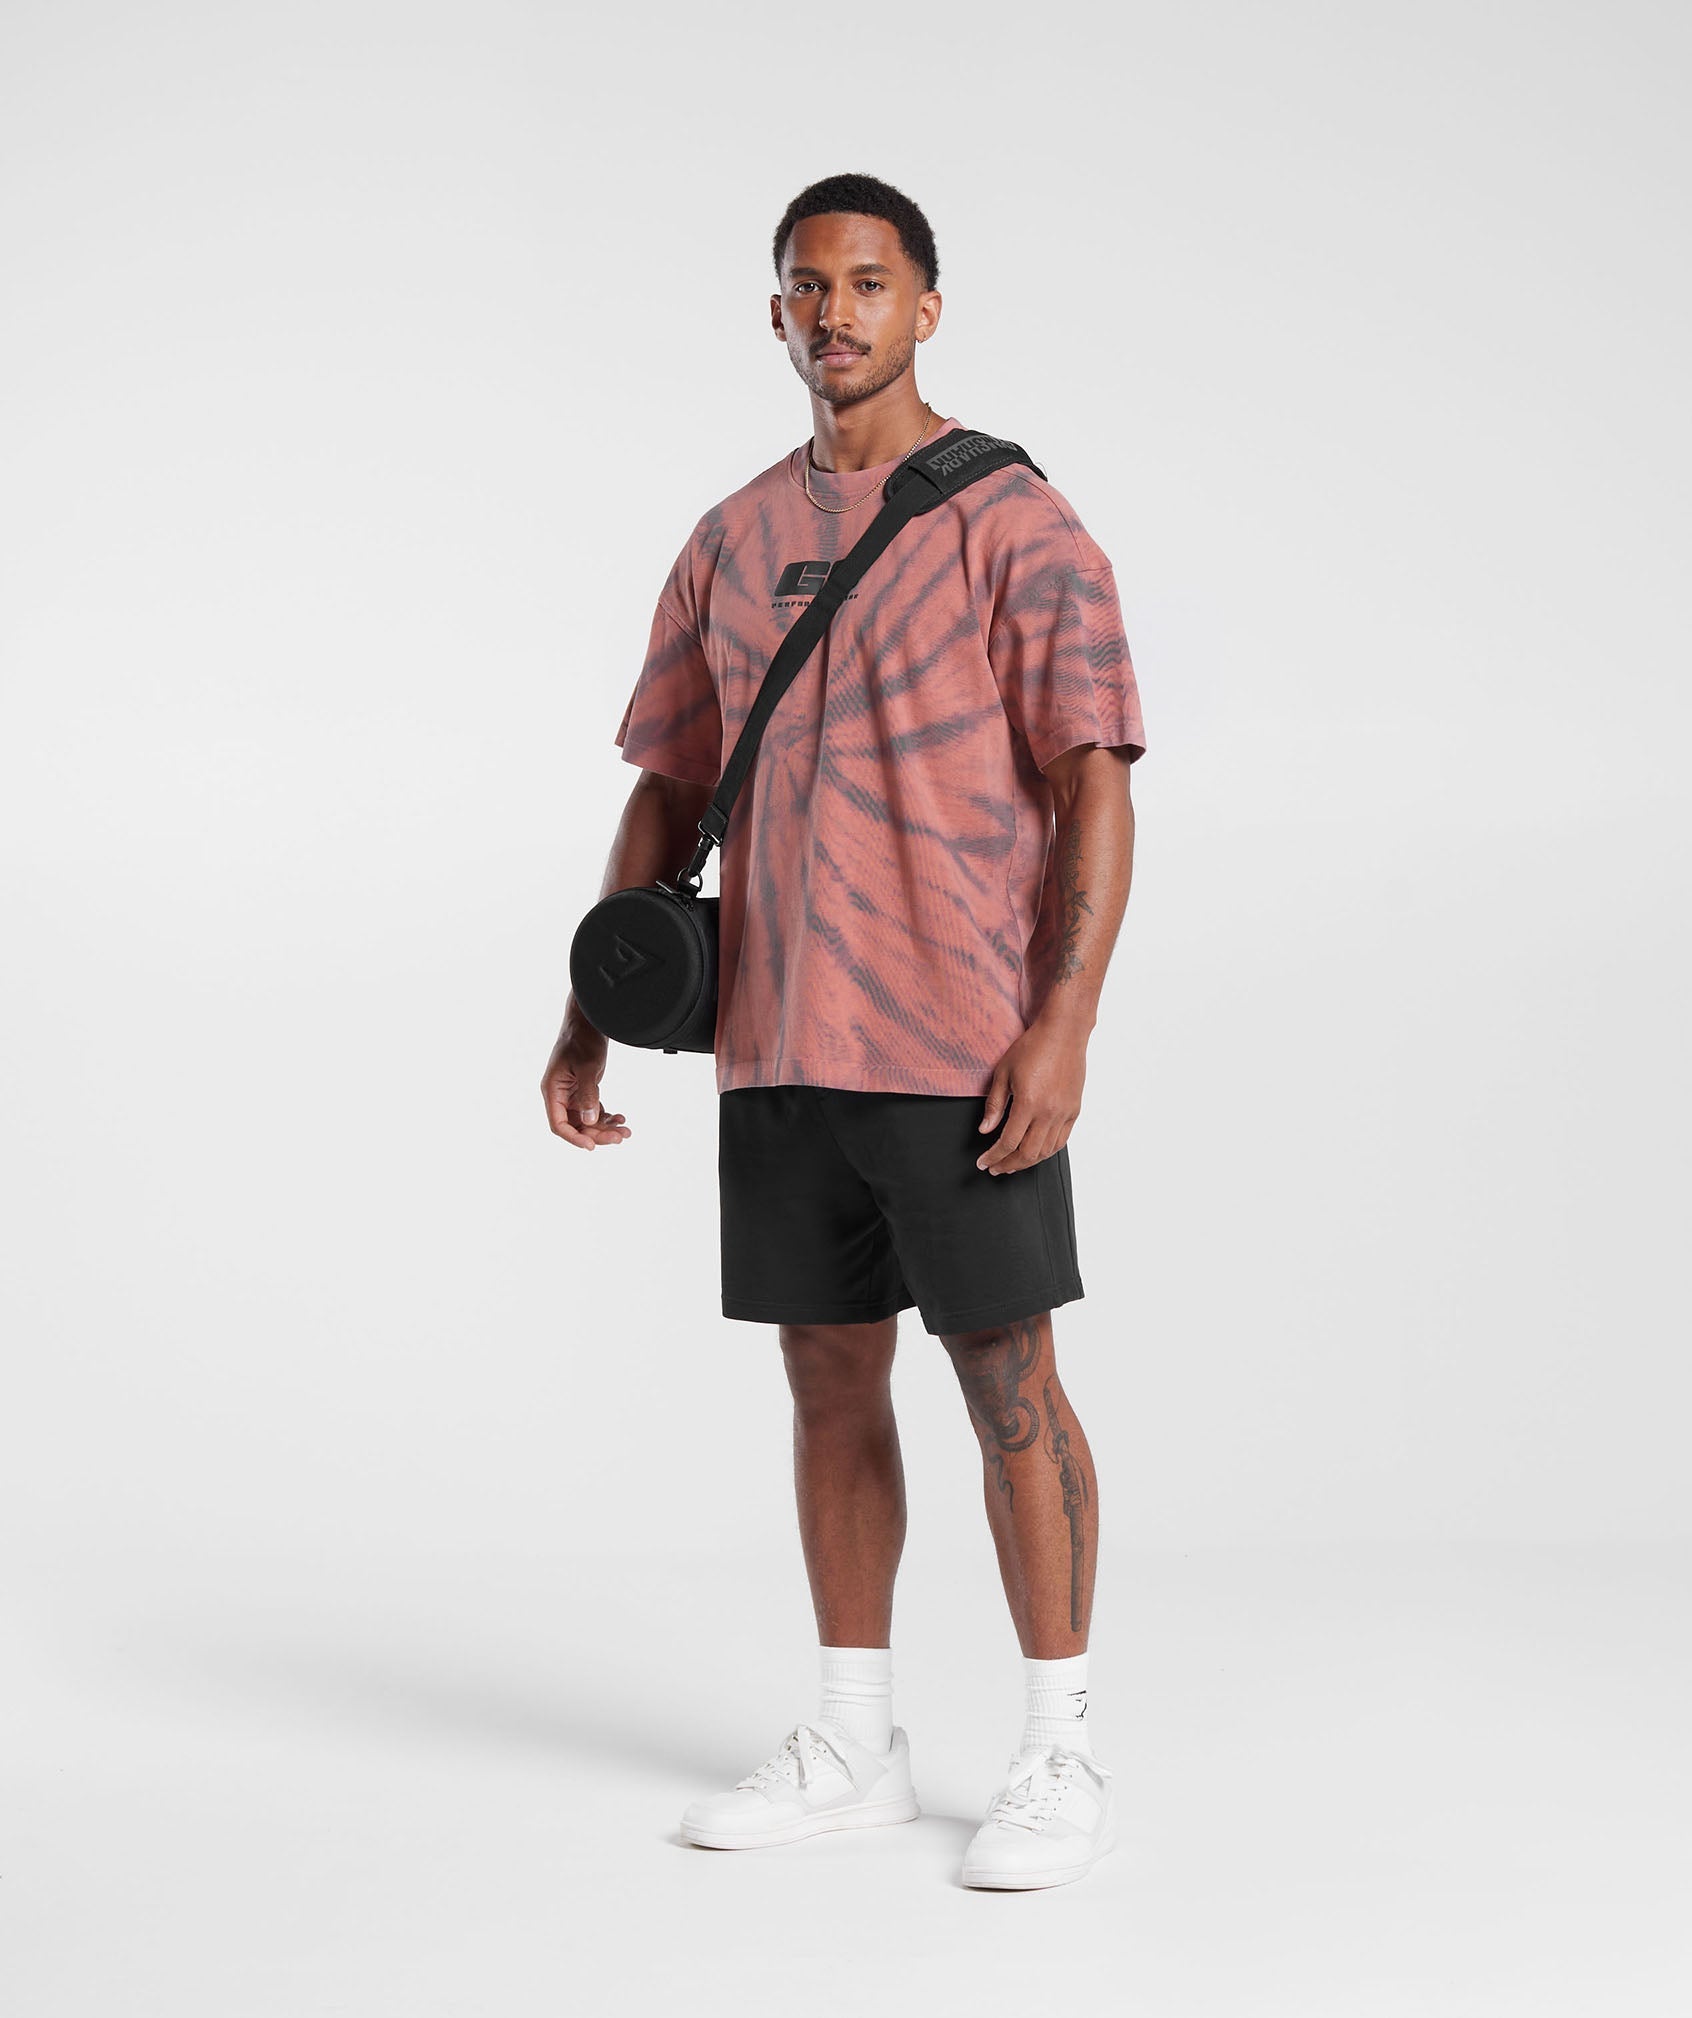 Rest Day T-Shirt in Terracotta Pink/Dusty Maroon/Spiral Optic Wash - view 4